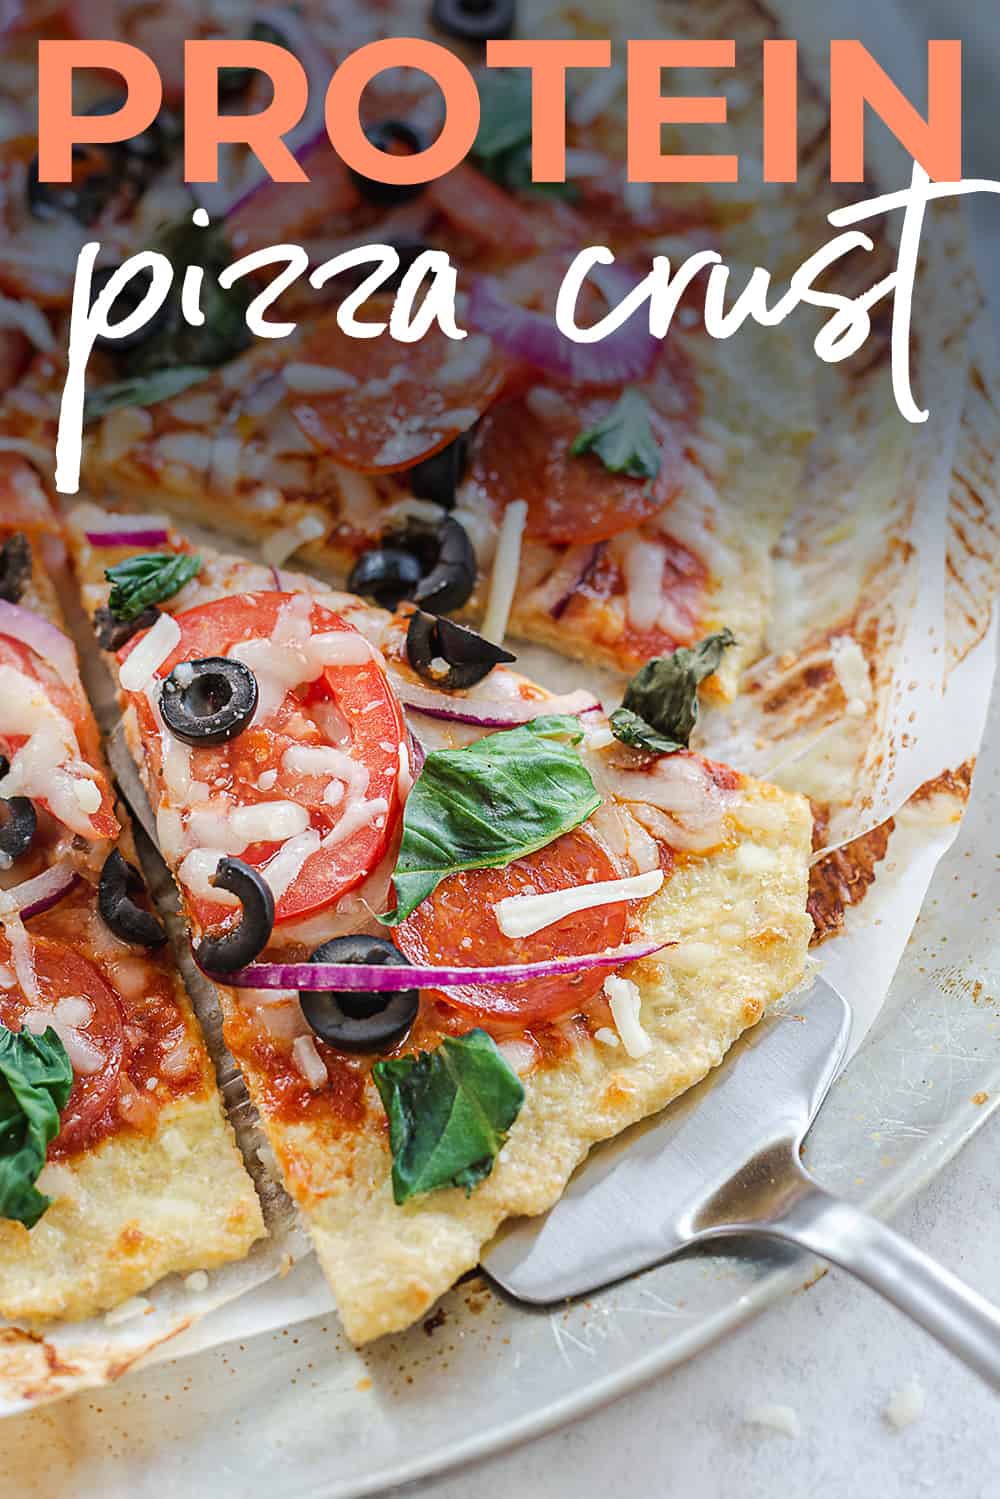 protein pizza crust with text for Pinterest.